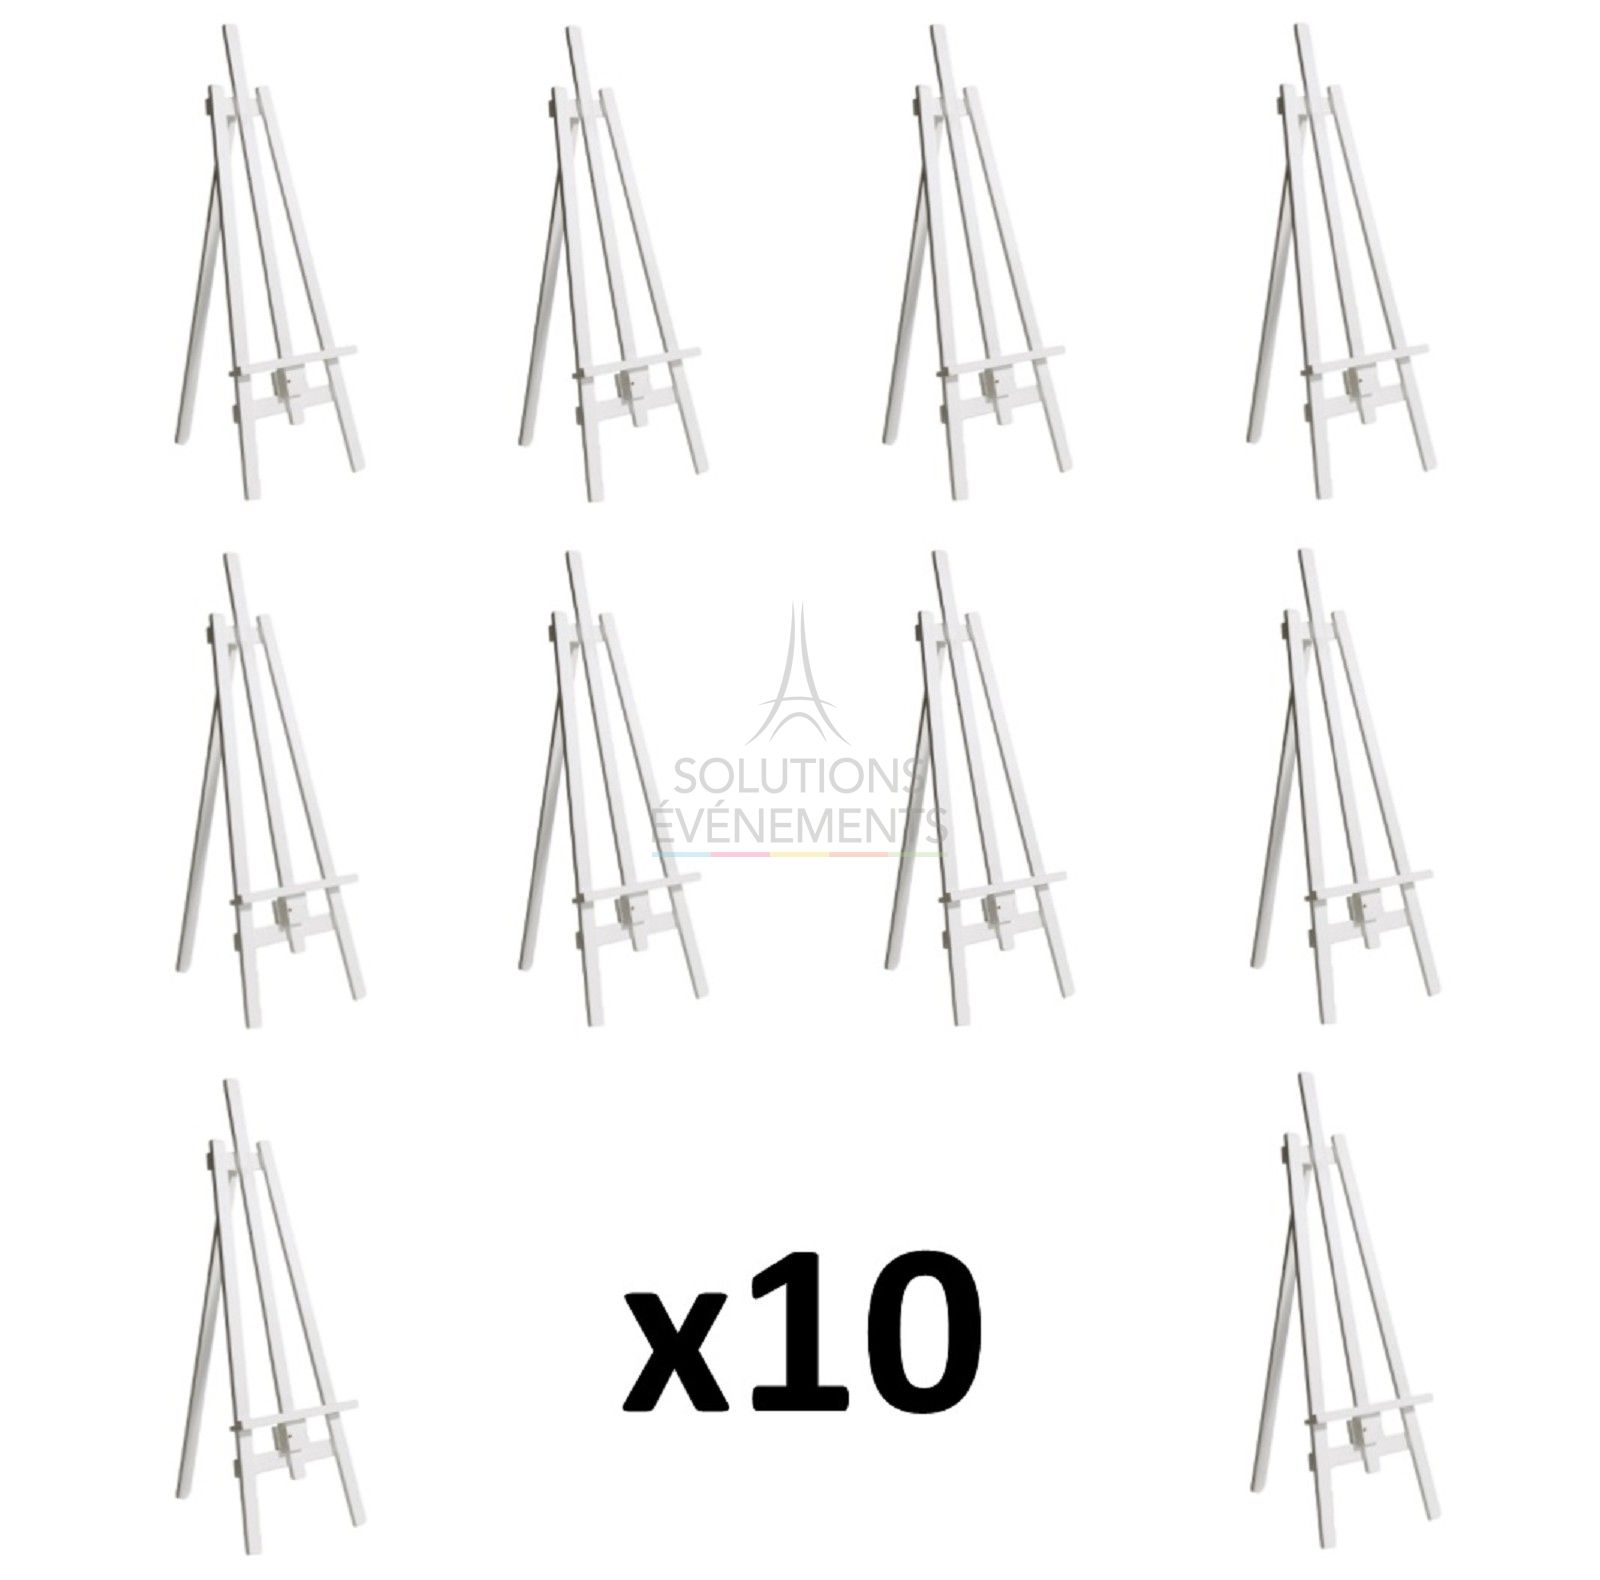 Rental of 10 white wooden easels